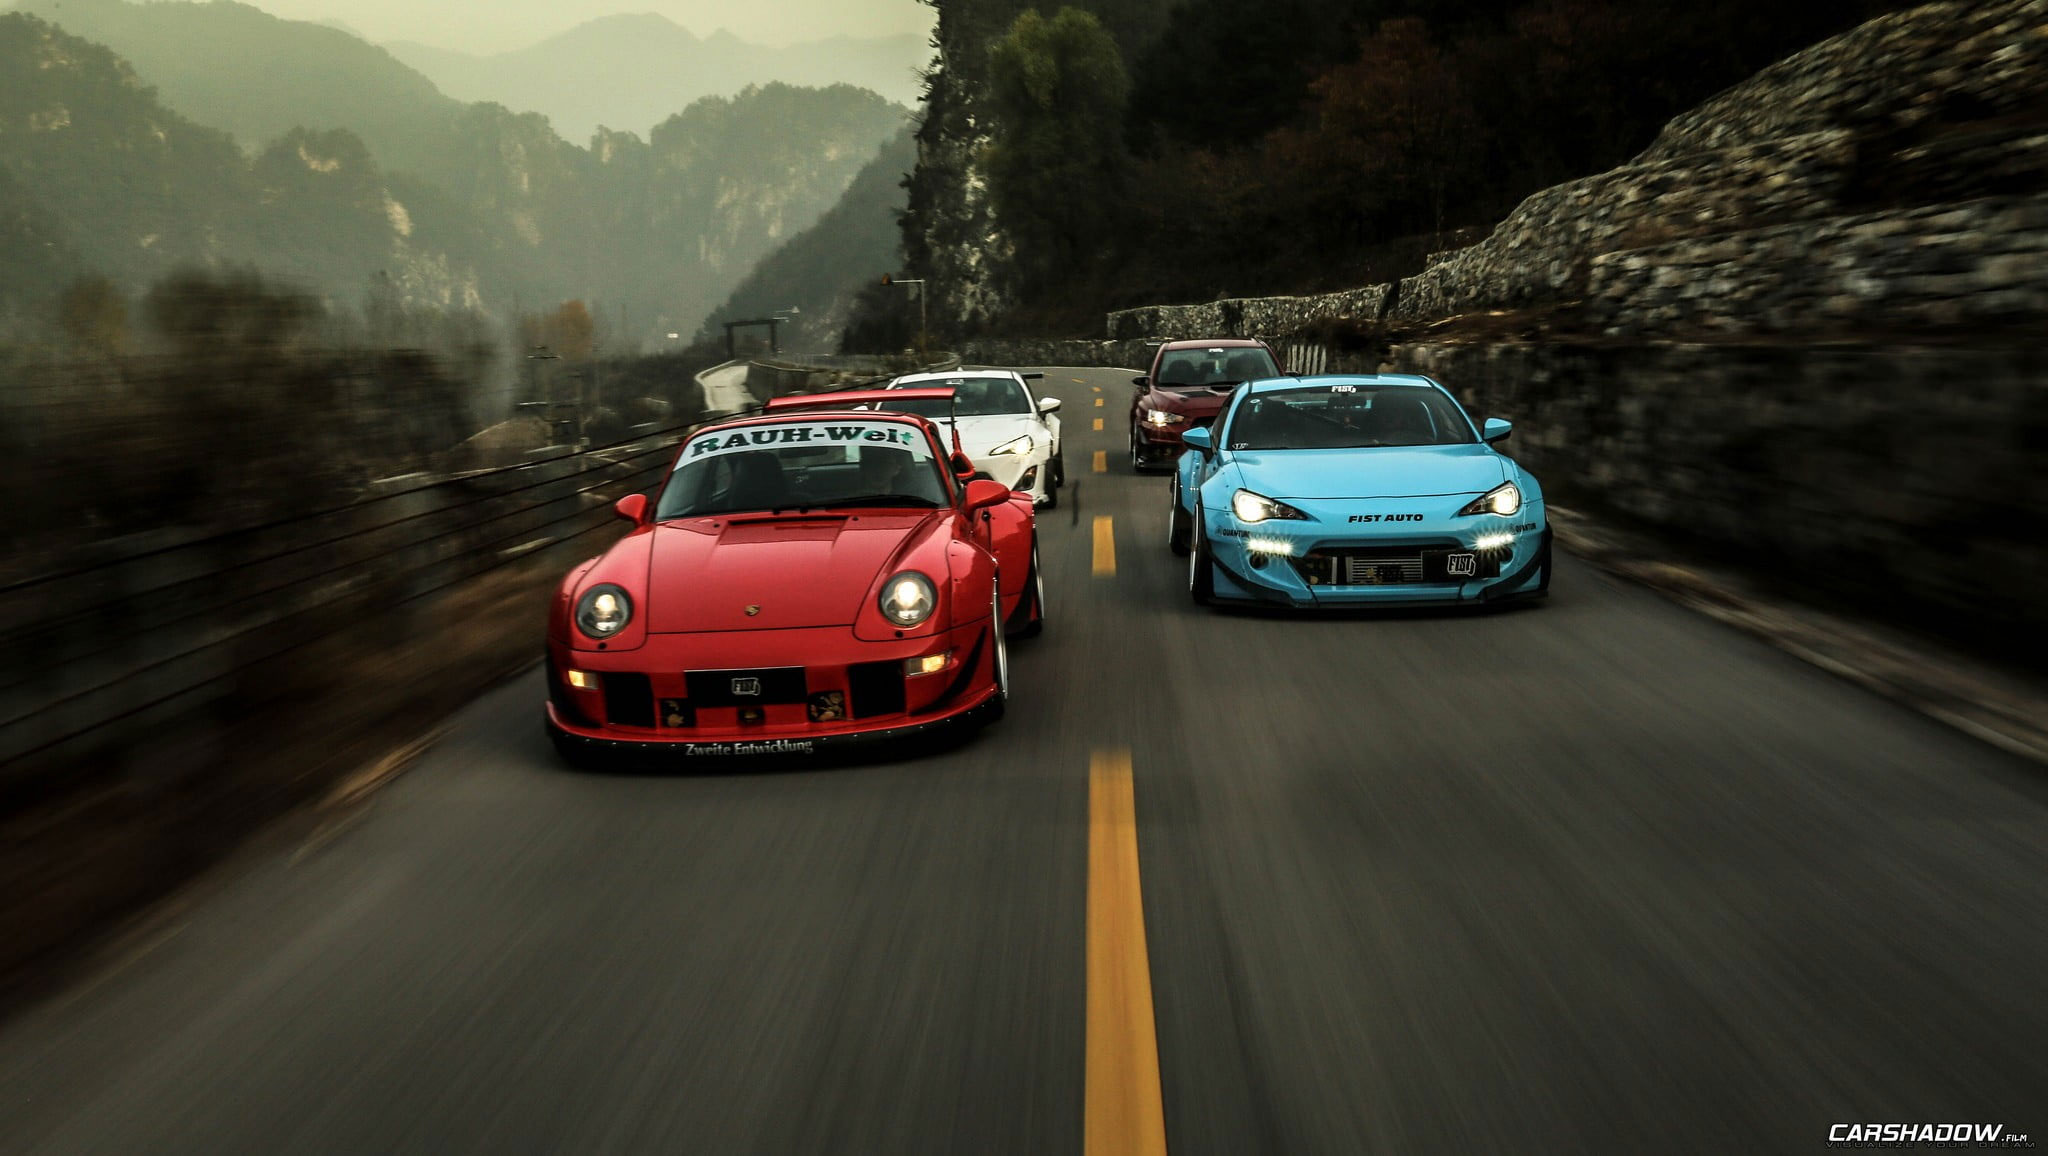 Wallpaper Blue And Red Cars, Rocket Bunny, Stance, Porsche